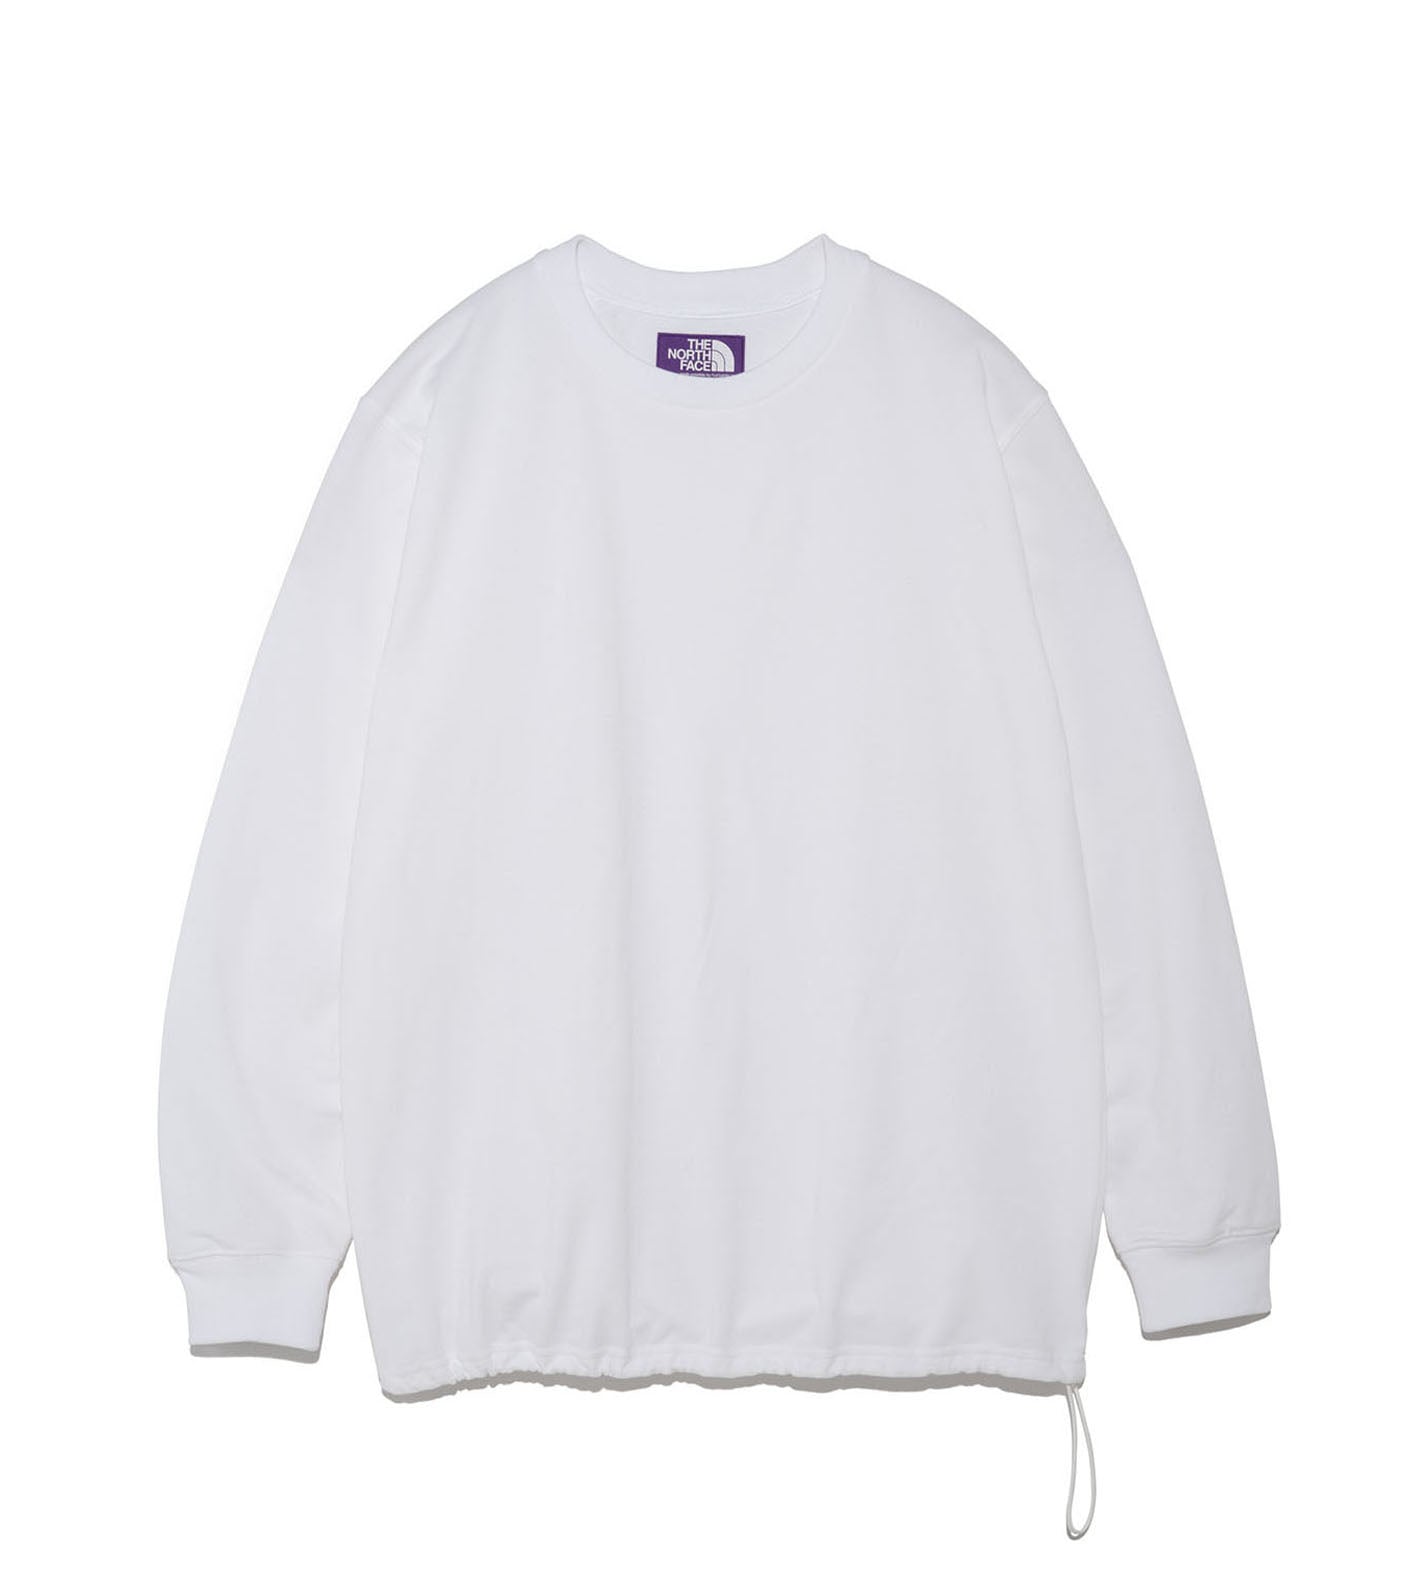 THE NORTH FACE PURPLE LABEL Field Long Sleeve Tee